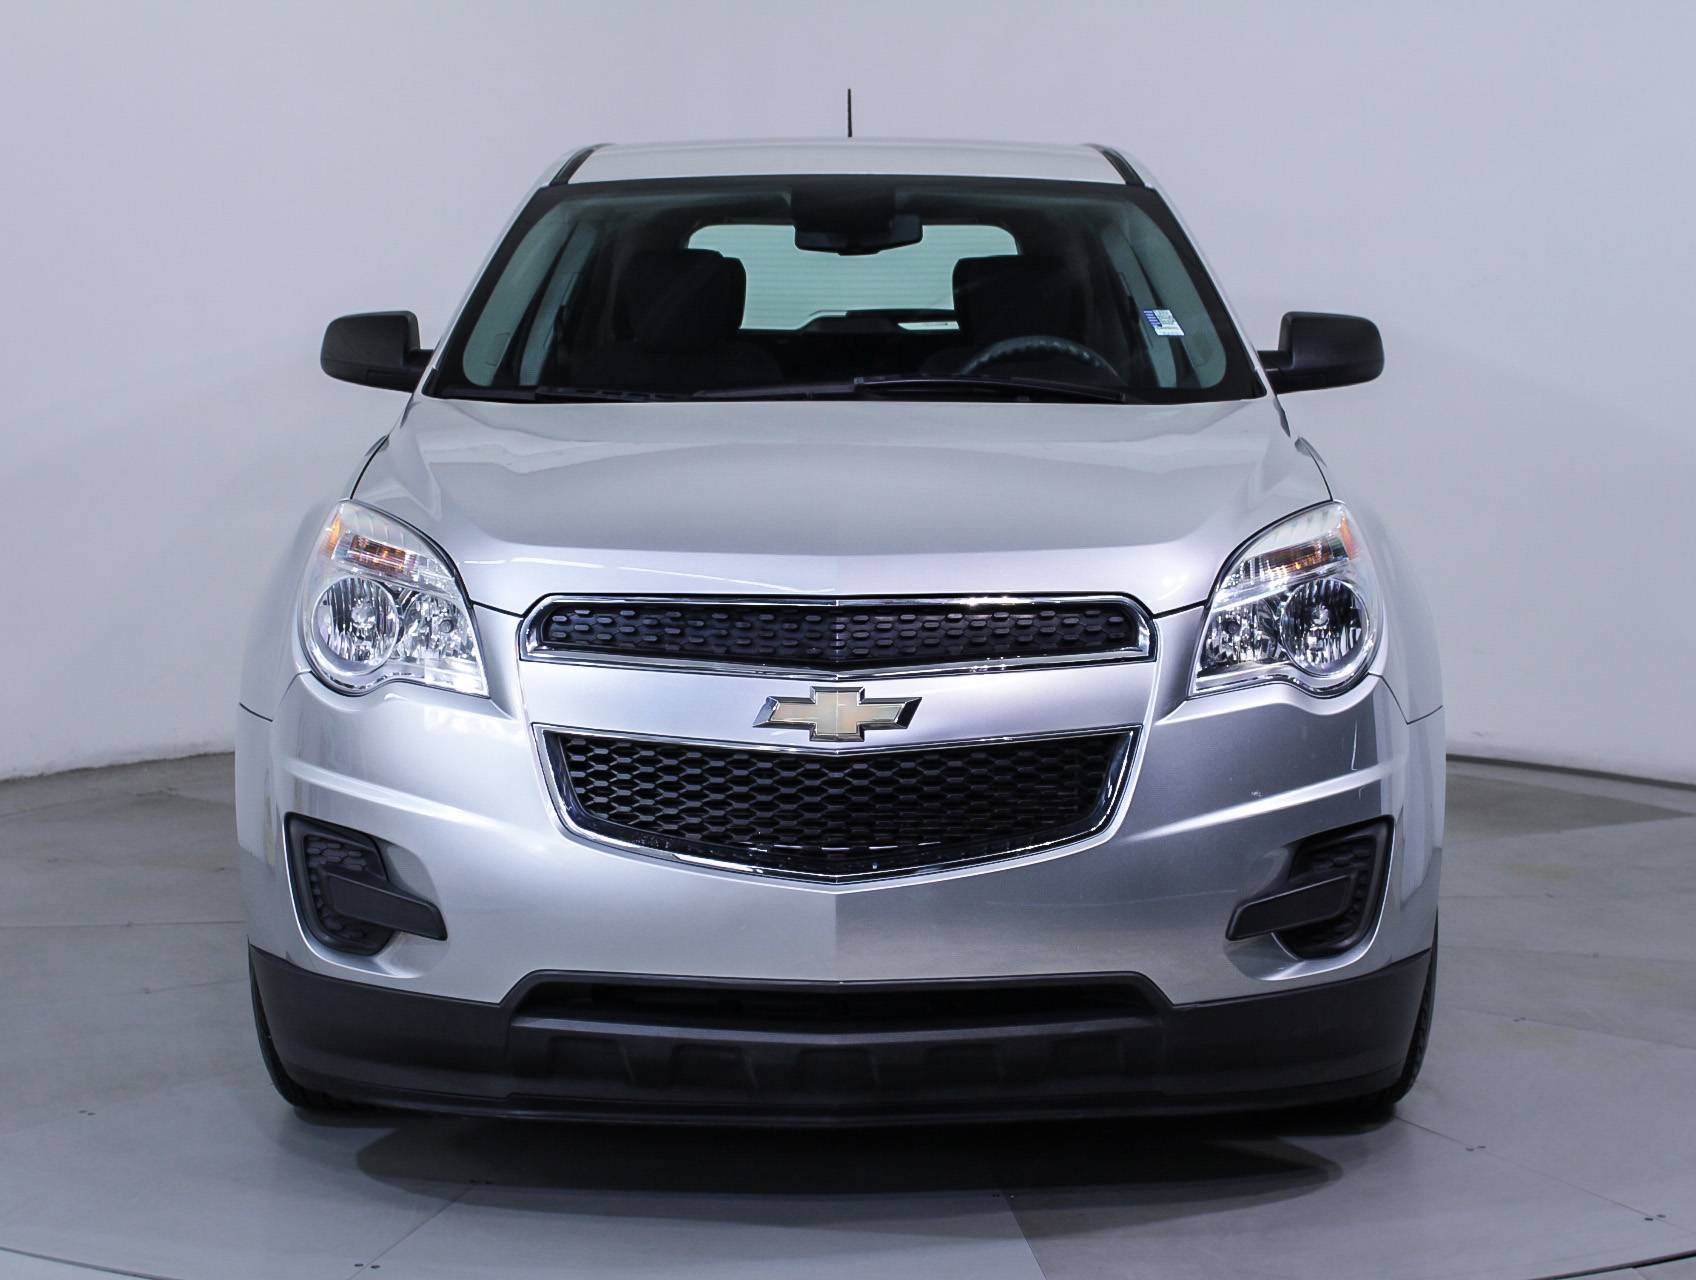 Florida Fine Cars - Used CHEVROLET EQUINOX 2013 HOLLYWOOD LS